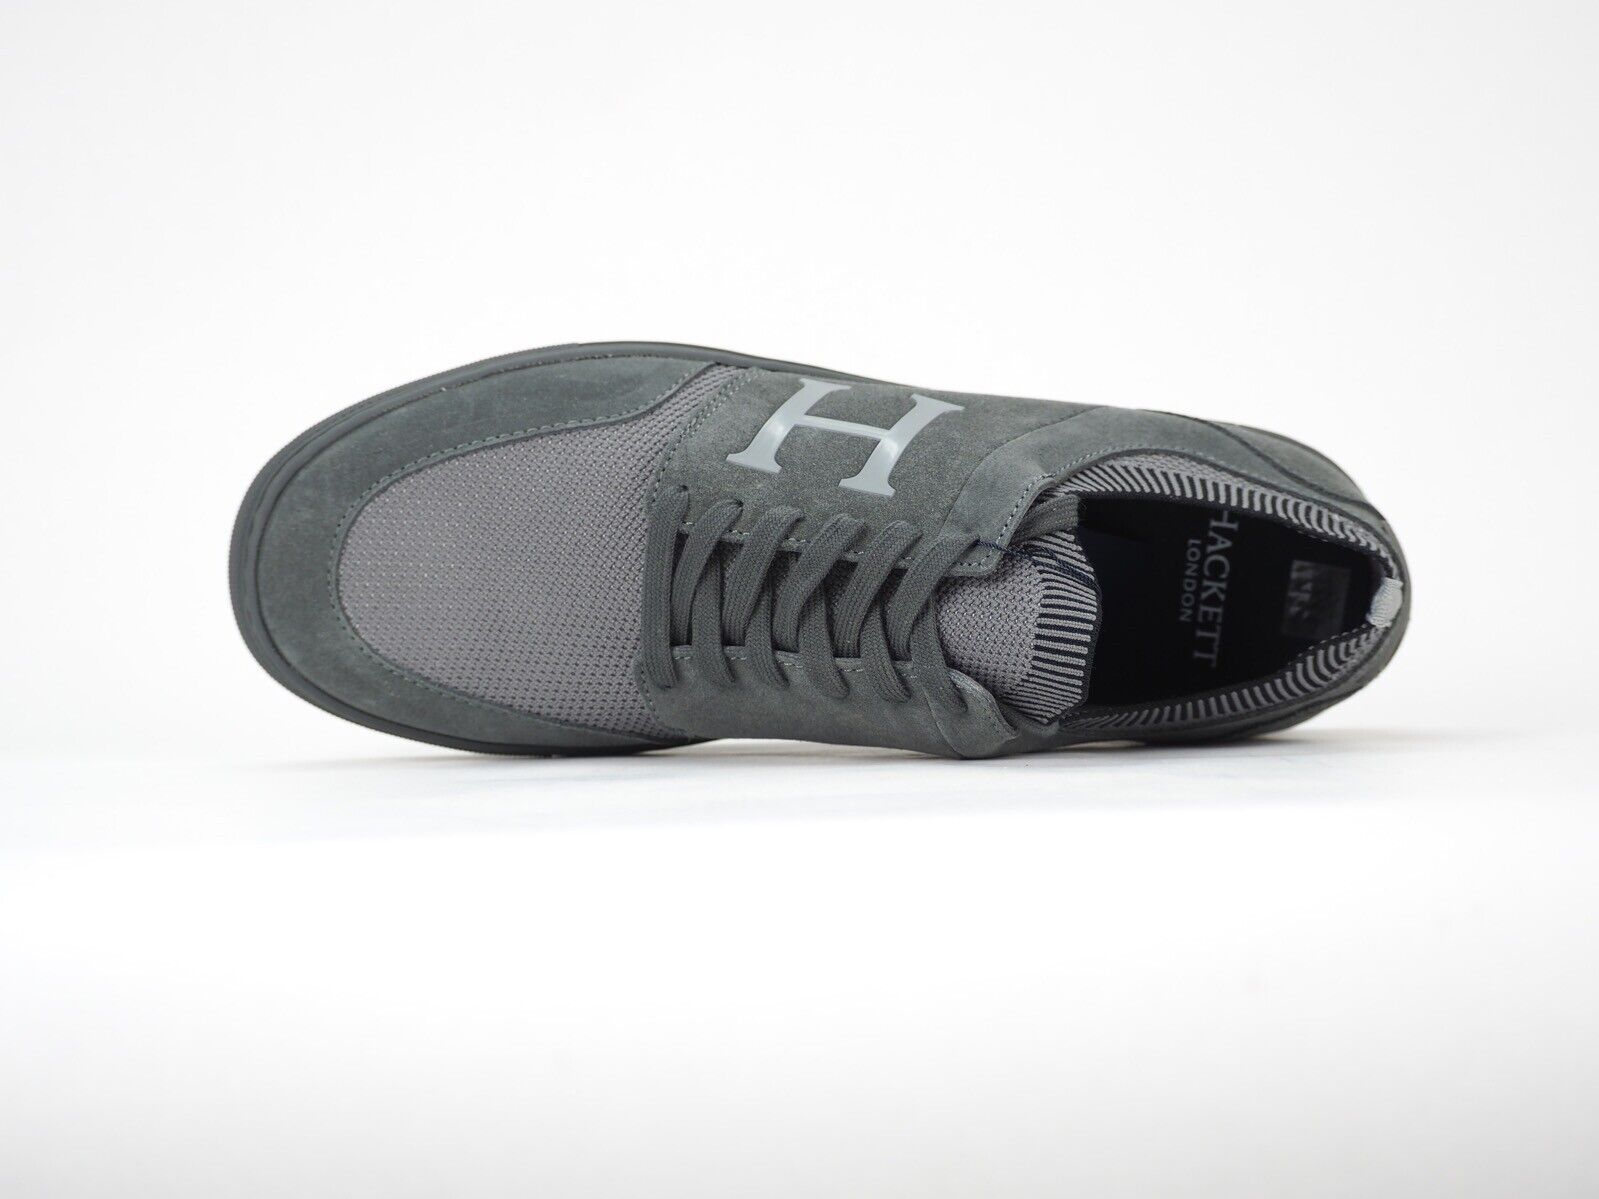 Mens Hackett London Entry Knit HMS20855 Grey Leather Casual Shoes Trainers UK 10